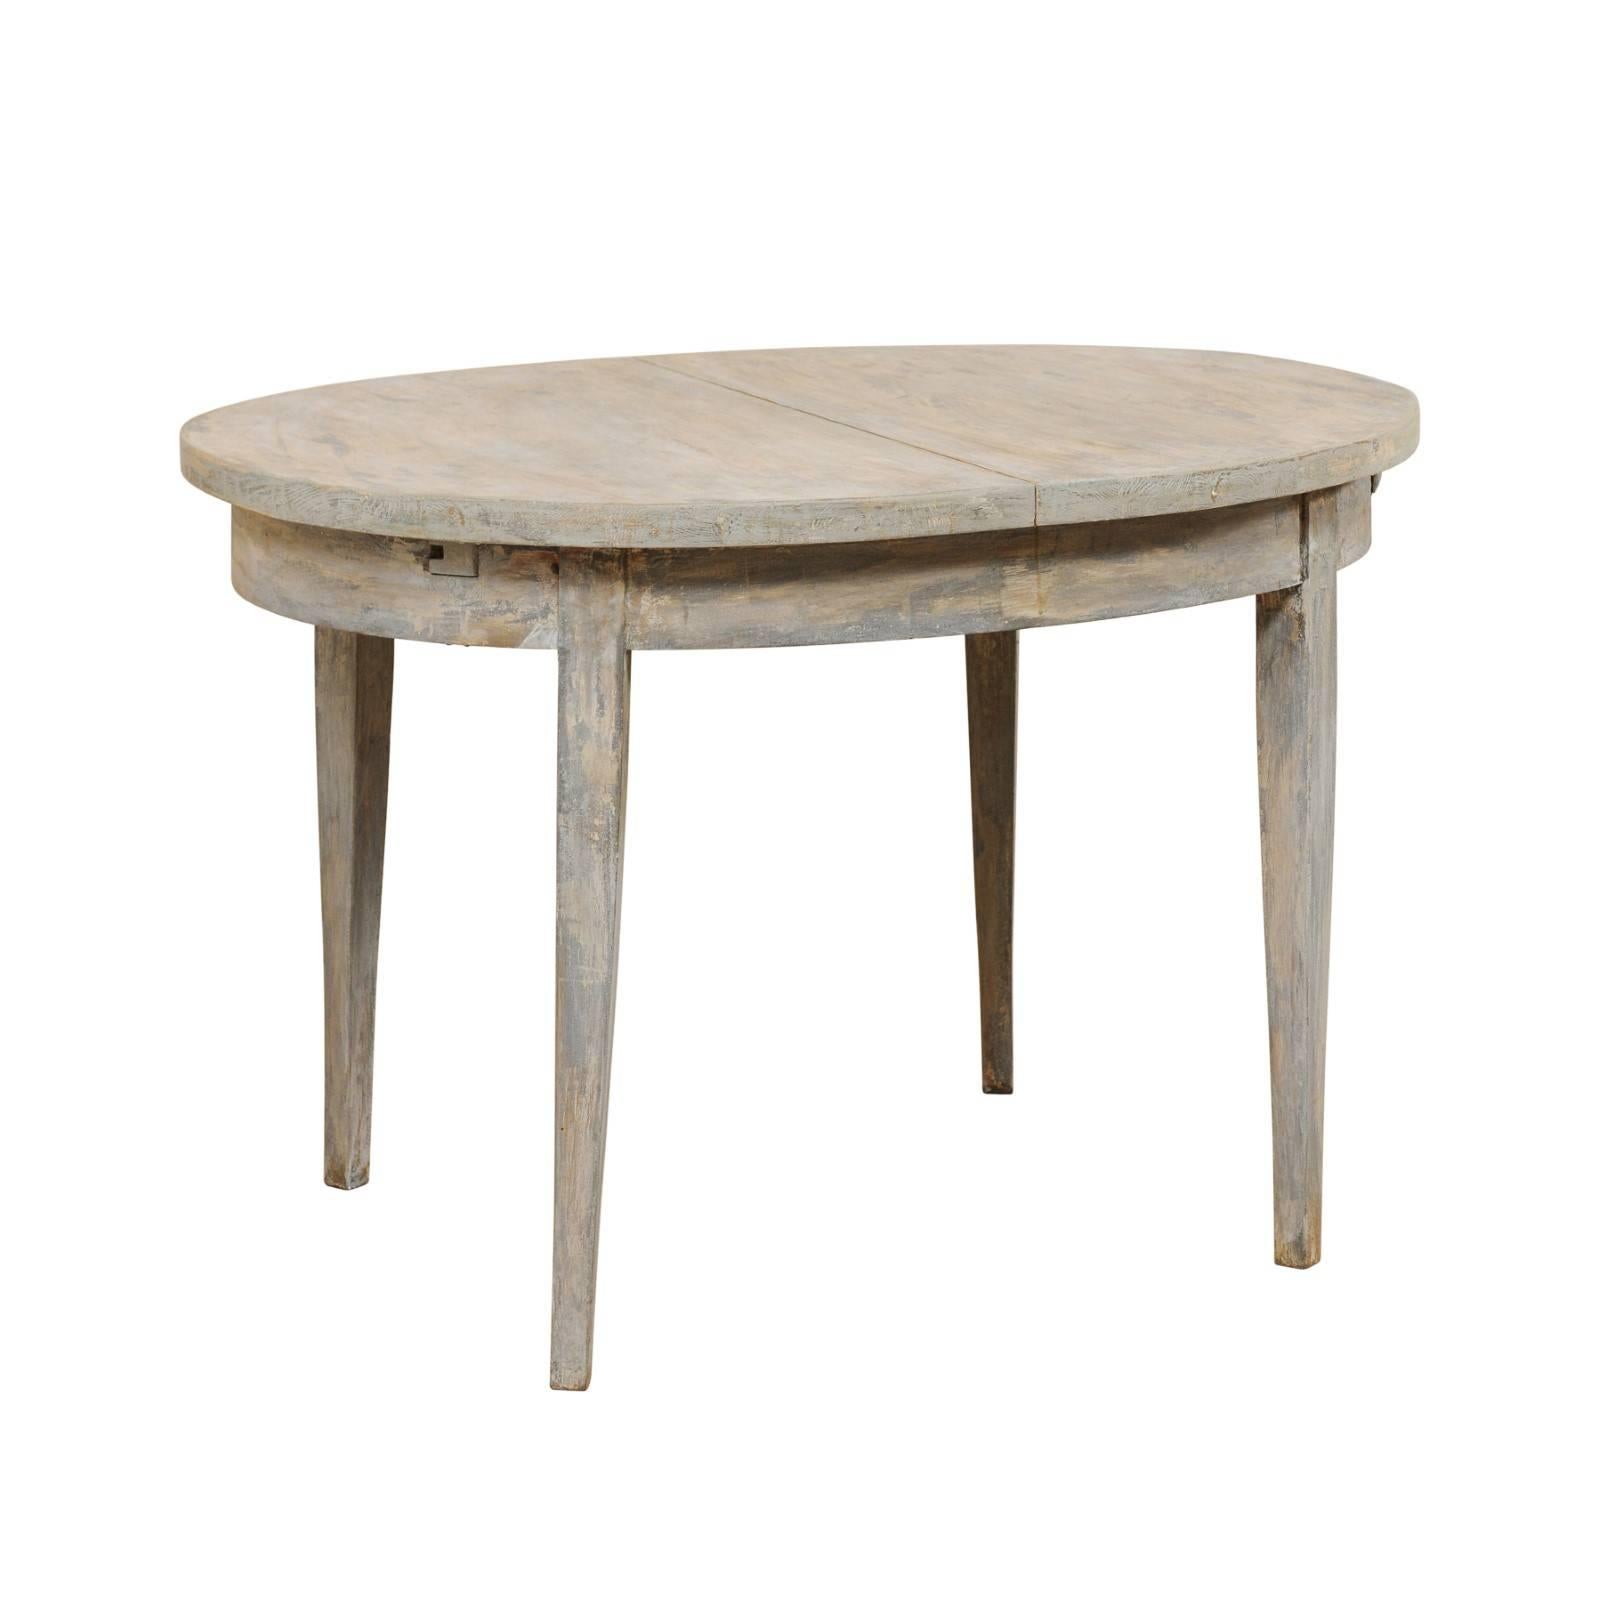 Swedish Midcentury Painted Wood Oval Occasional Table in Soft Blue-Grey